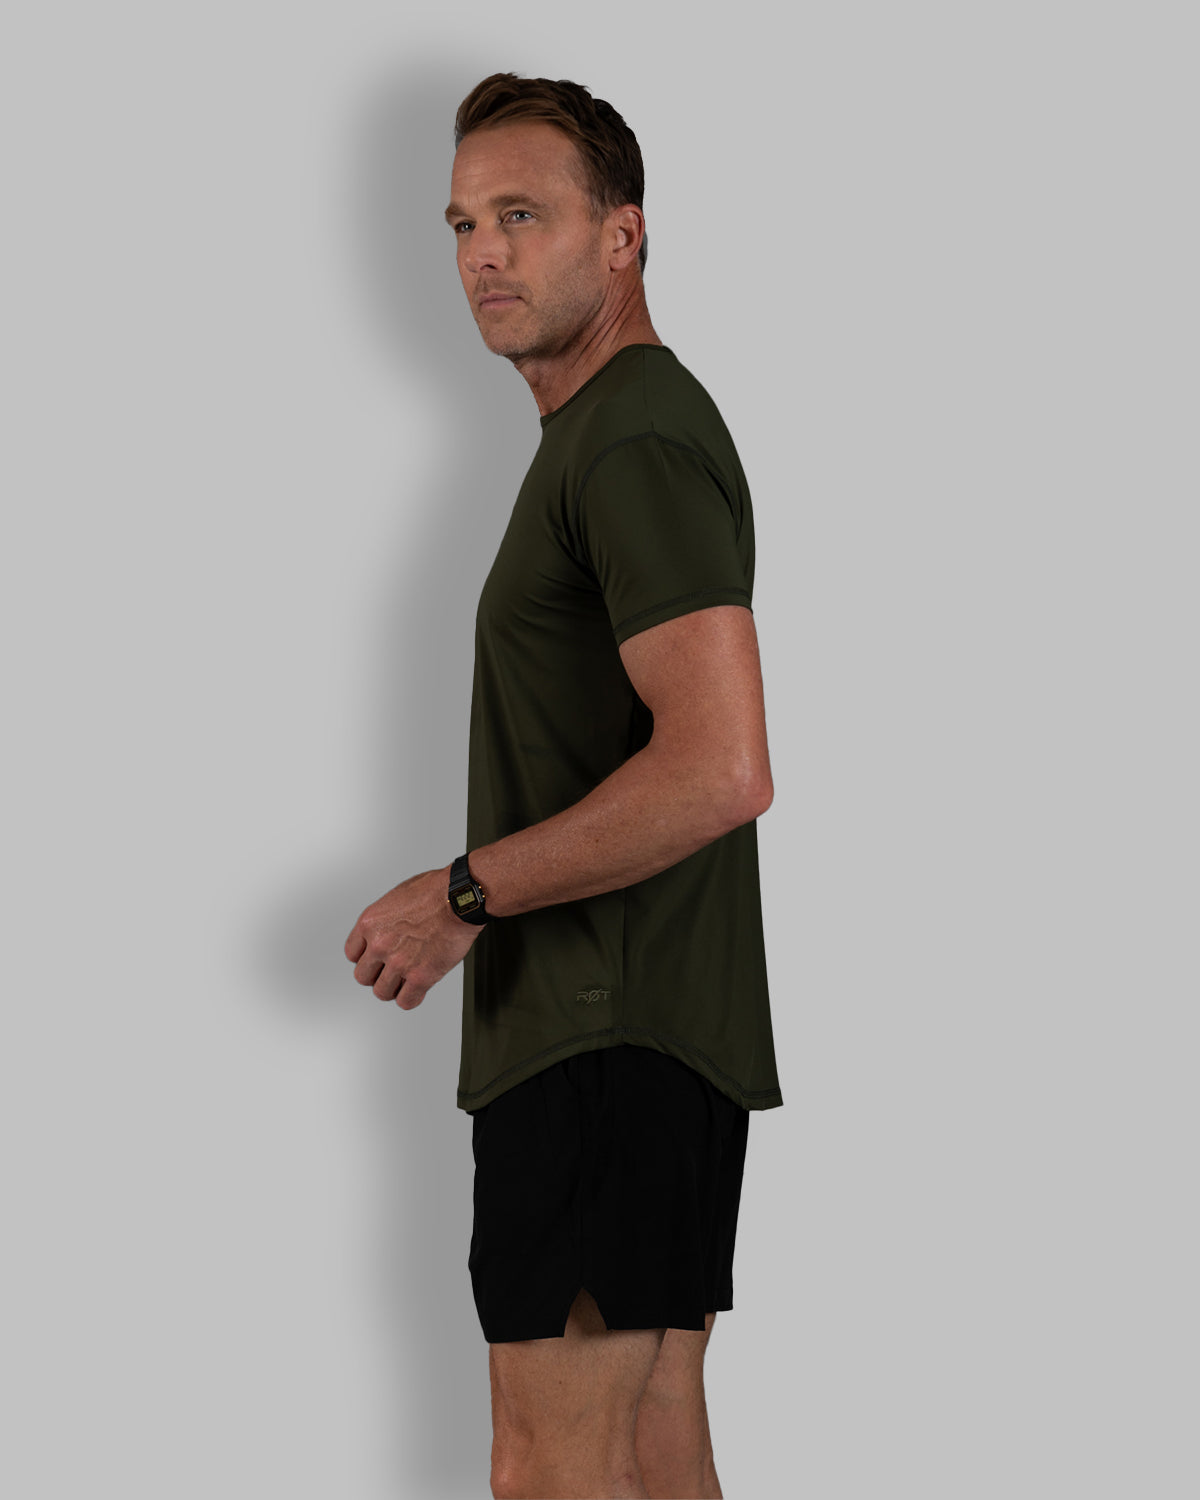 Zero-G Curved T-Shirt: Olive Drab